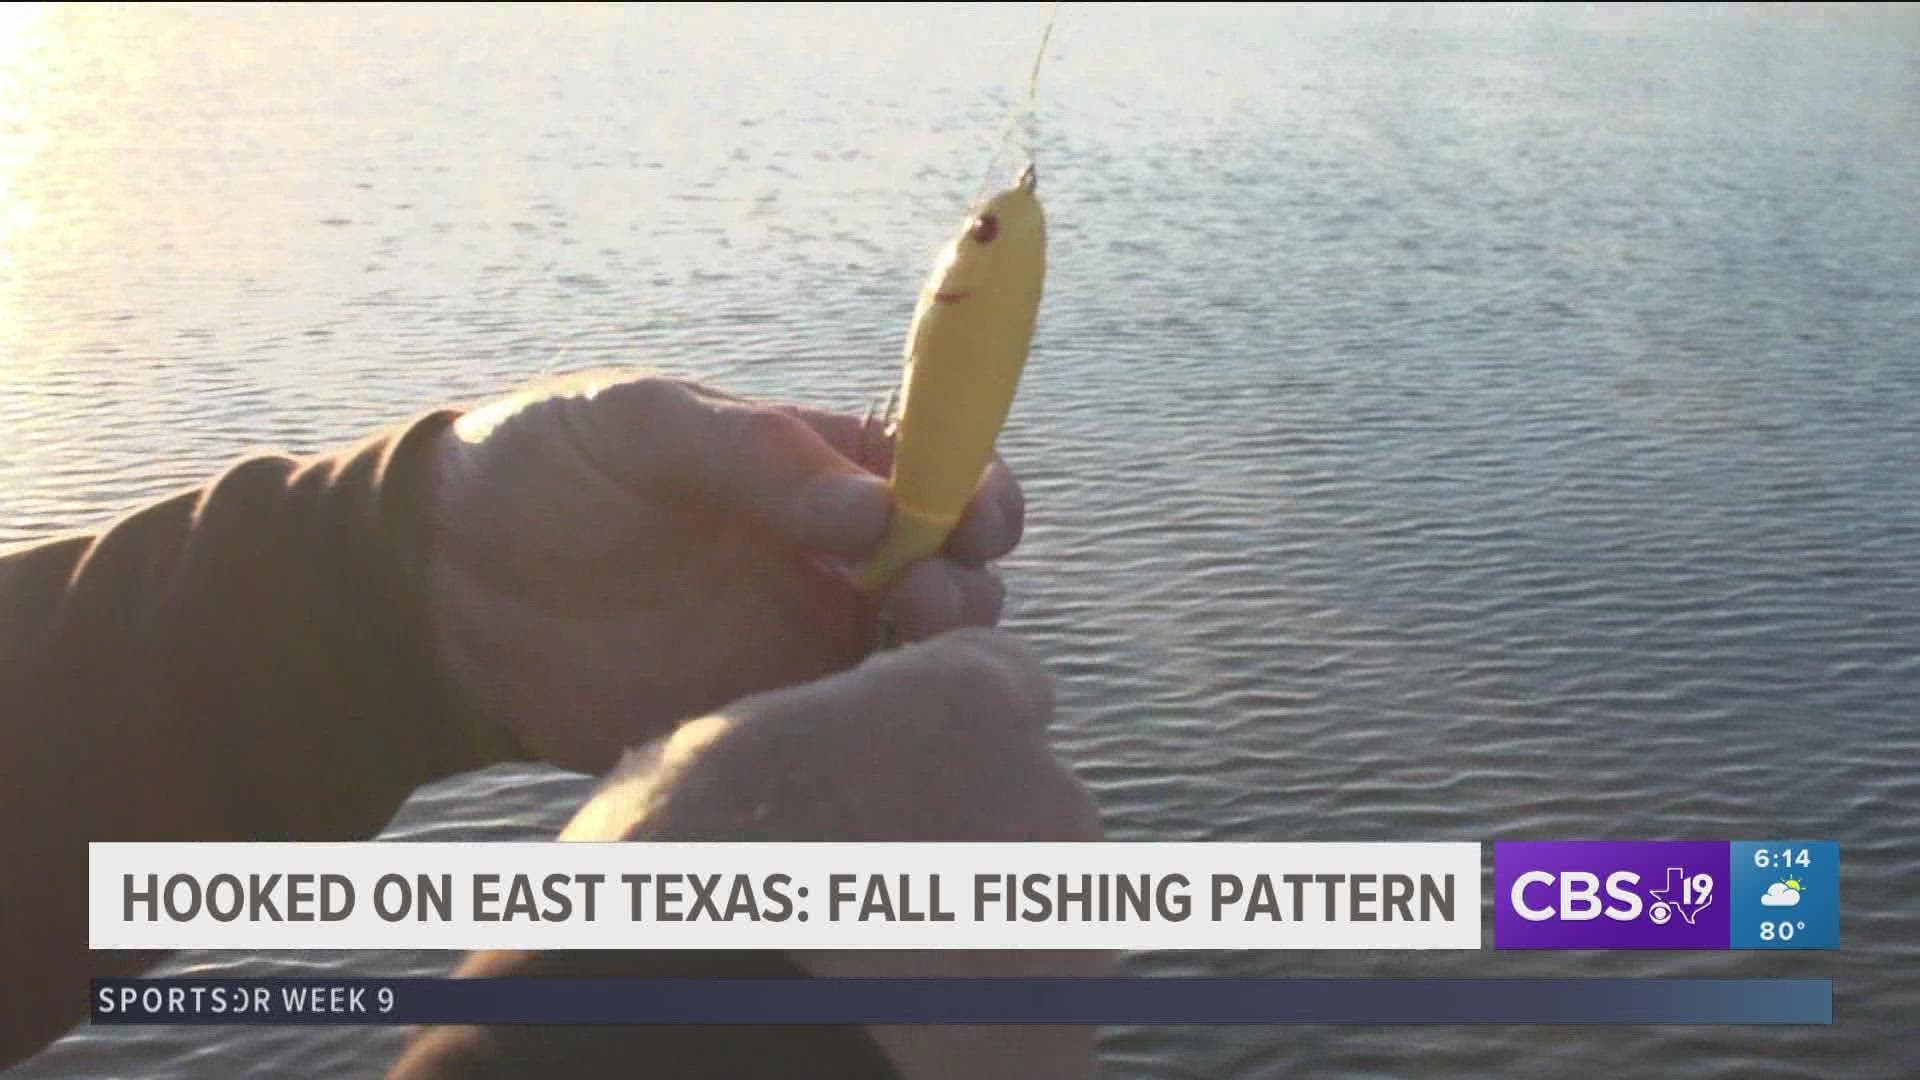 For more Hooked on East Texas stories visit https://www.cbs19.tv/hooked-on-east-texas